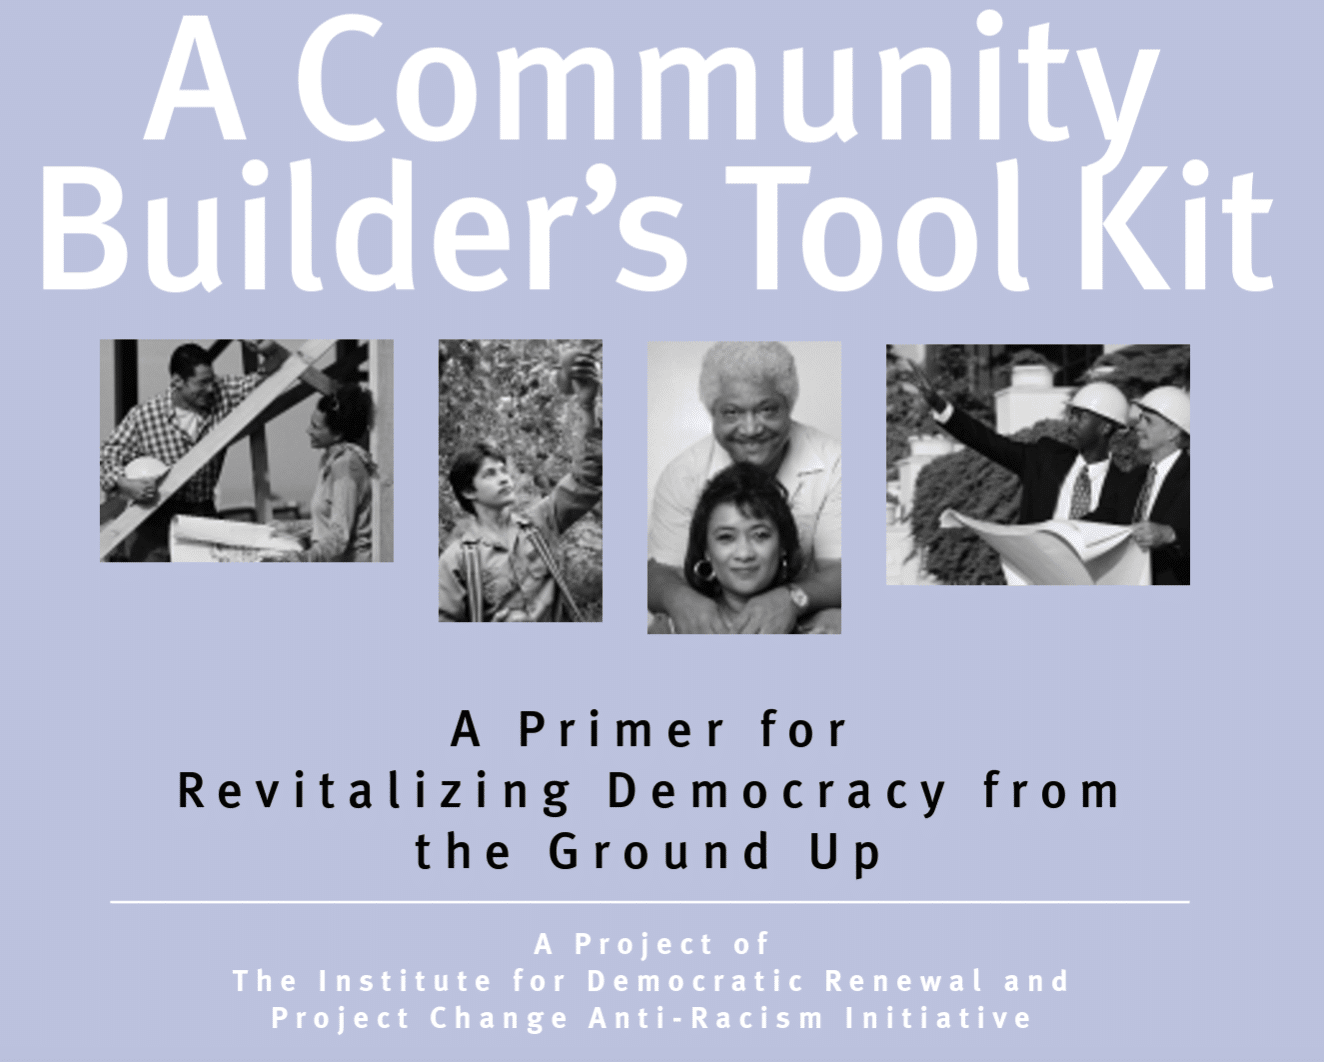 A community builder's toolkit: a primer for revitalizing democracy from the ground up